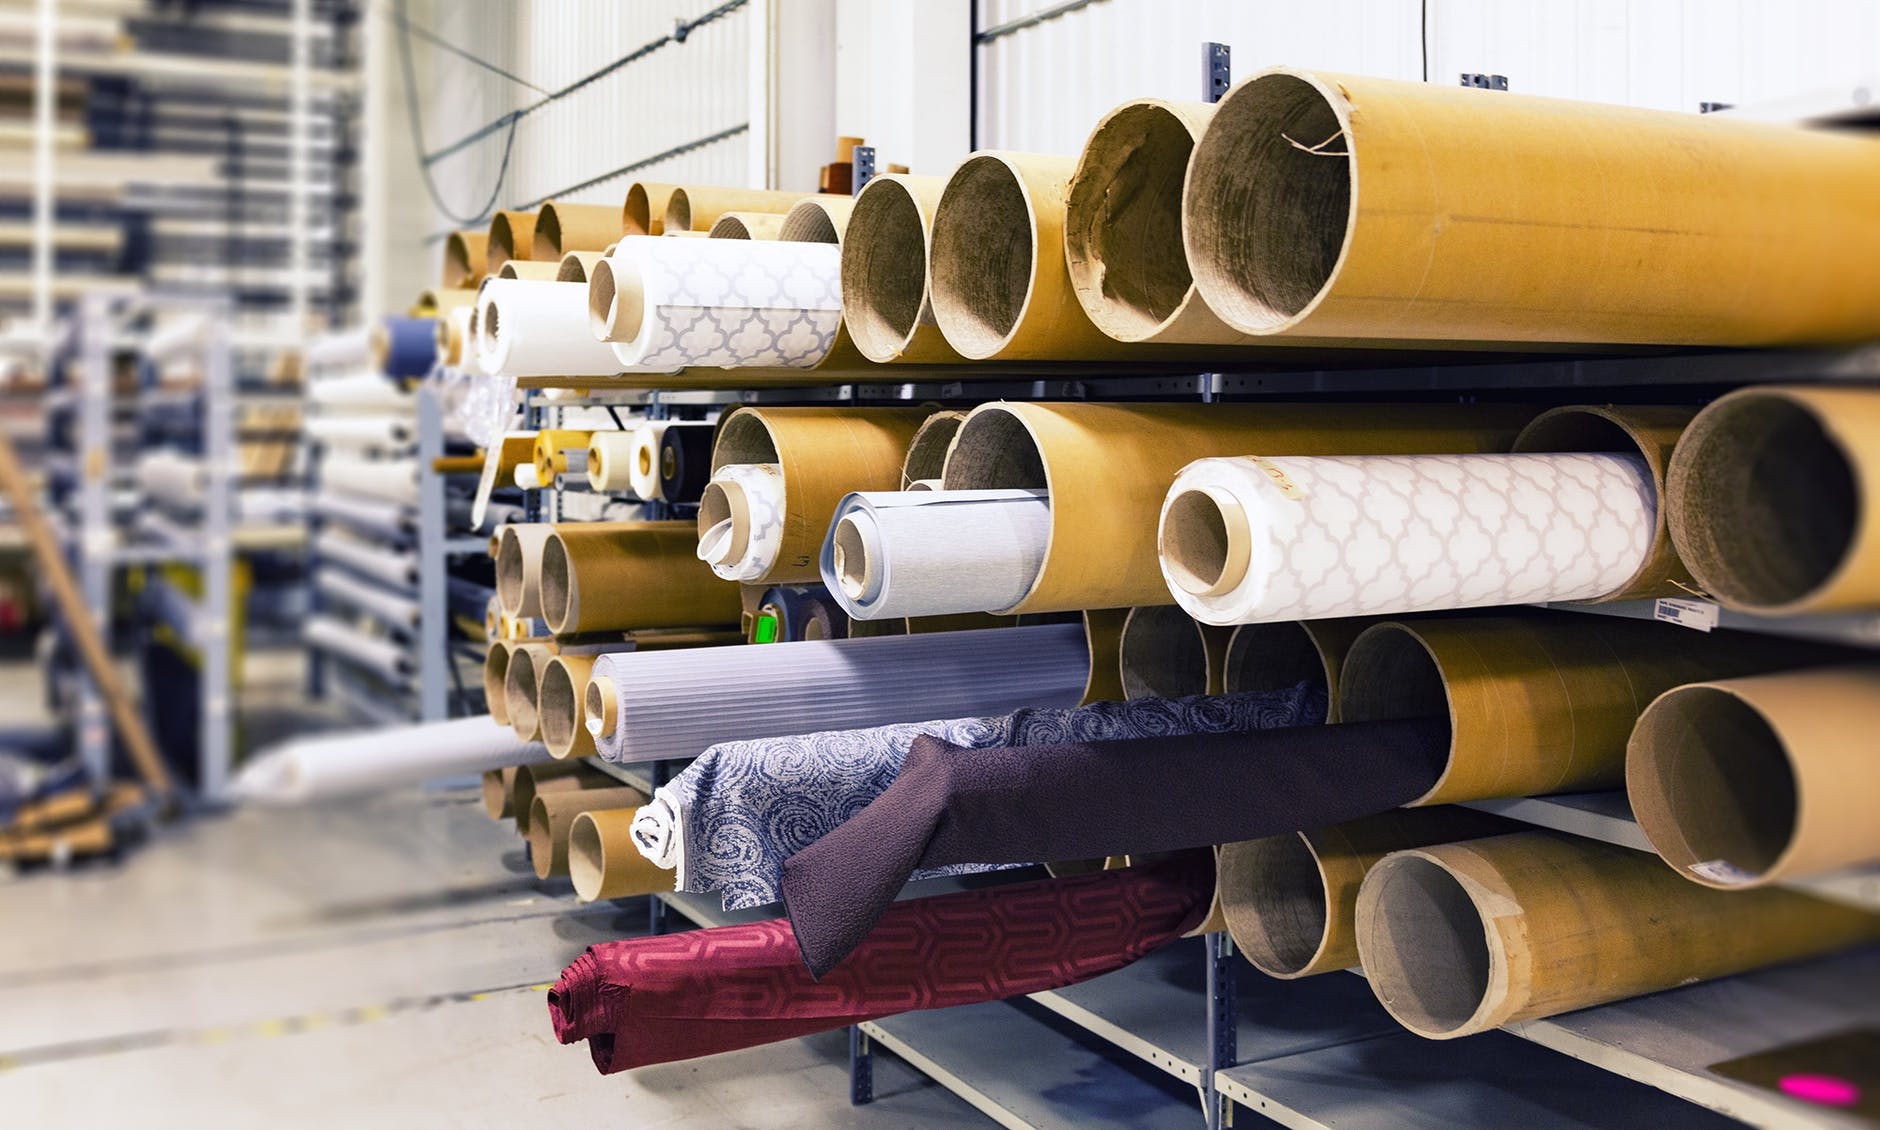 Preliminary study to start a Textile Manufacturing Company in India